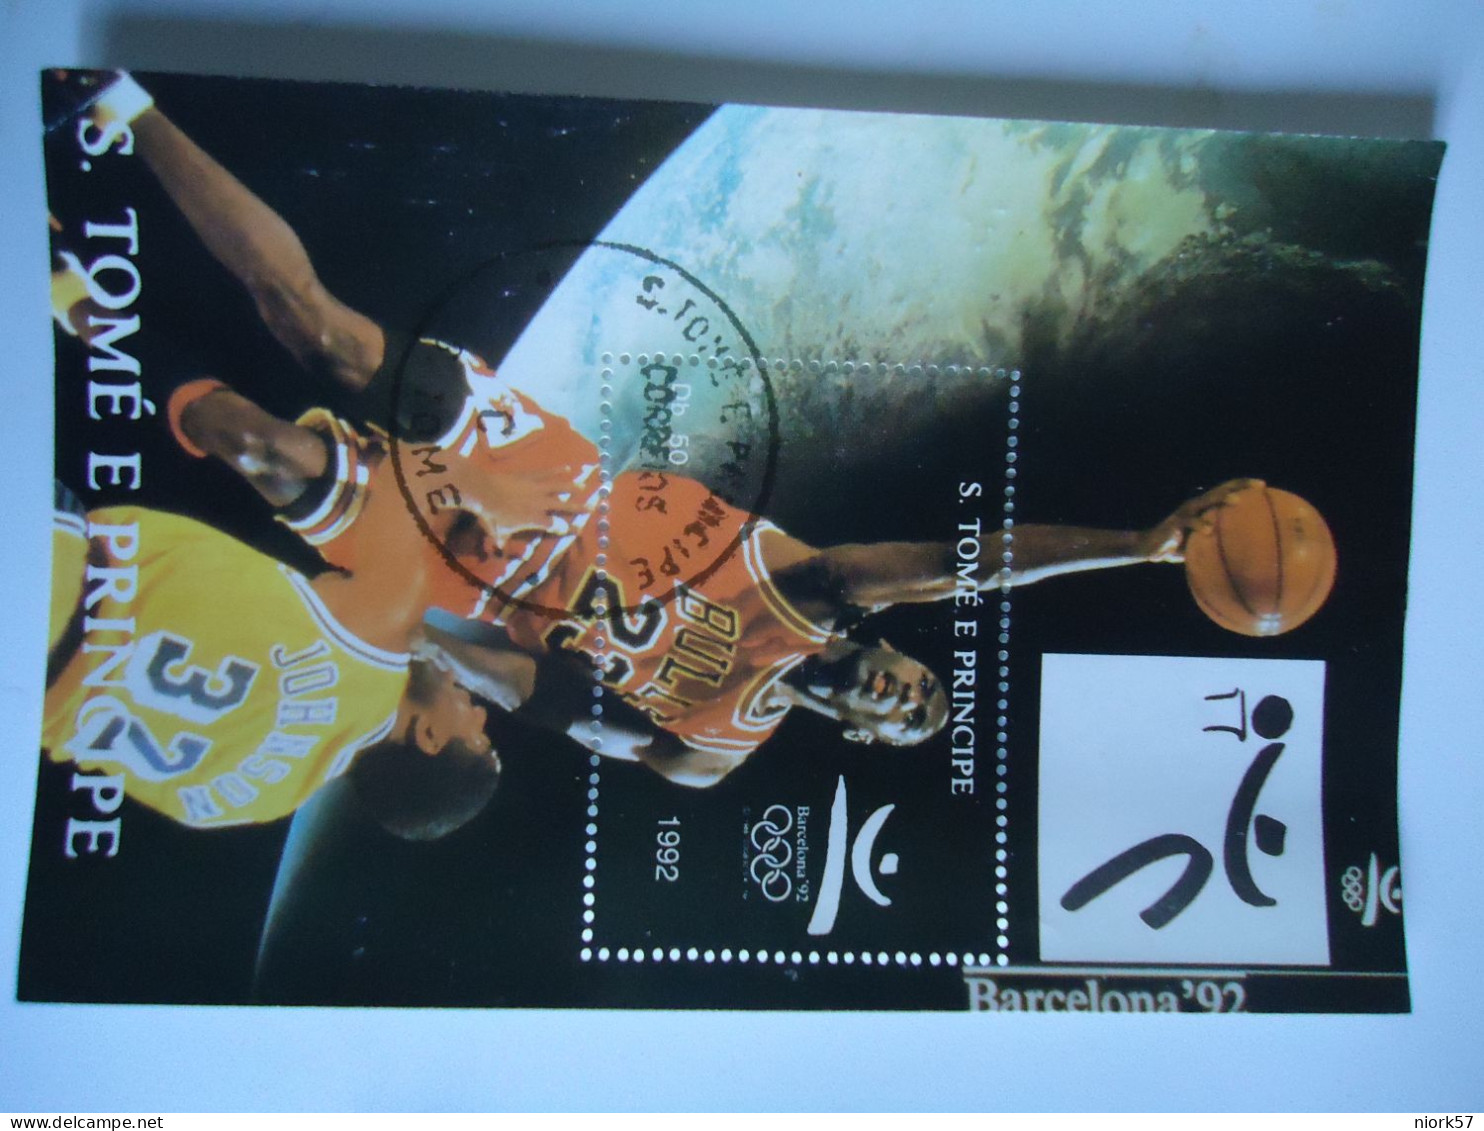 S.TOME E PRINCIPE  USED SHEET  OLYMPIC GAMES BARCELONA 92 BASKETBALL - Ete 1992: Barcelone